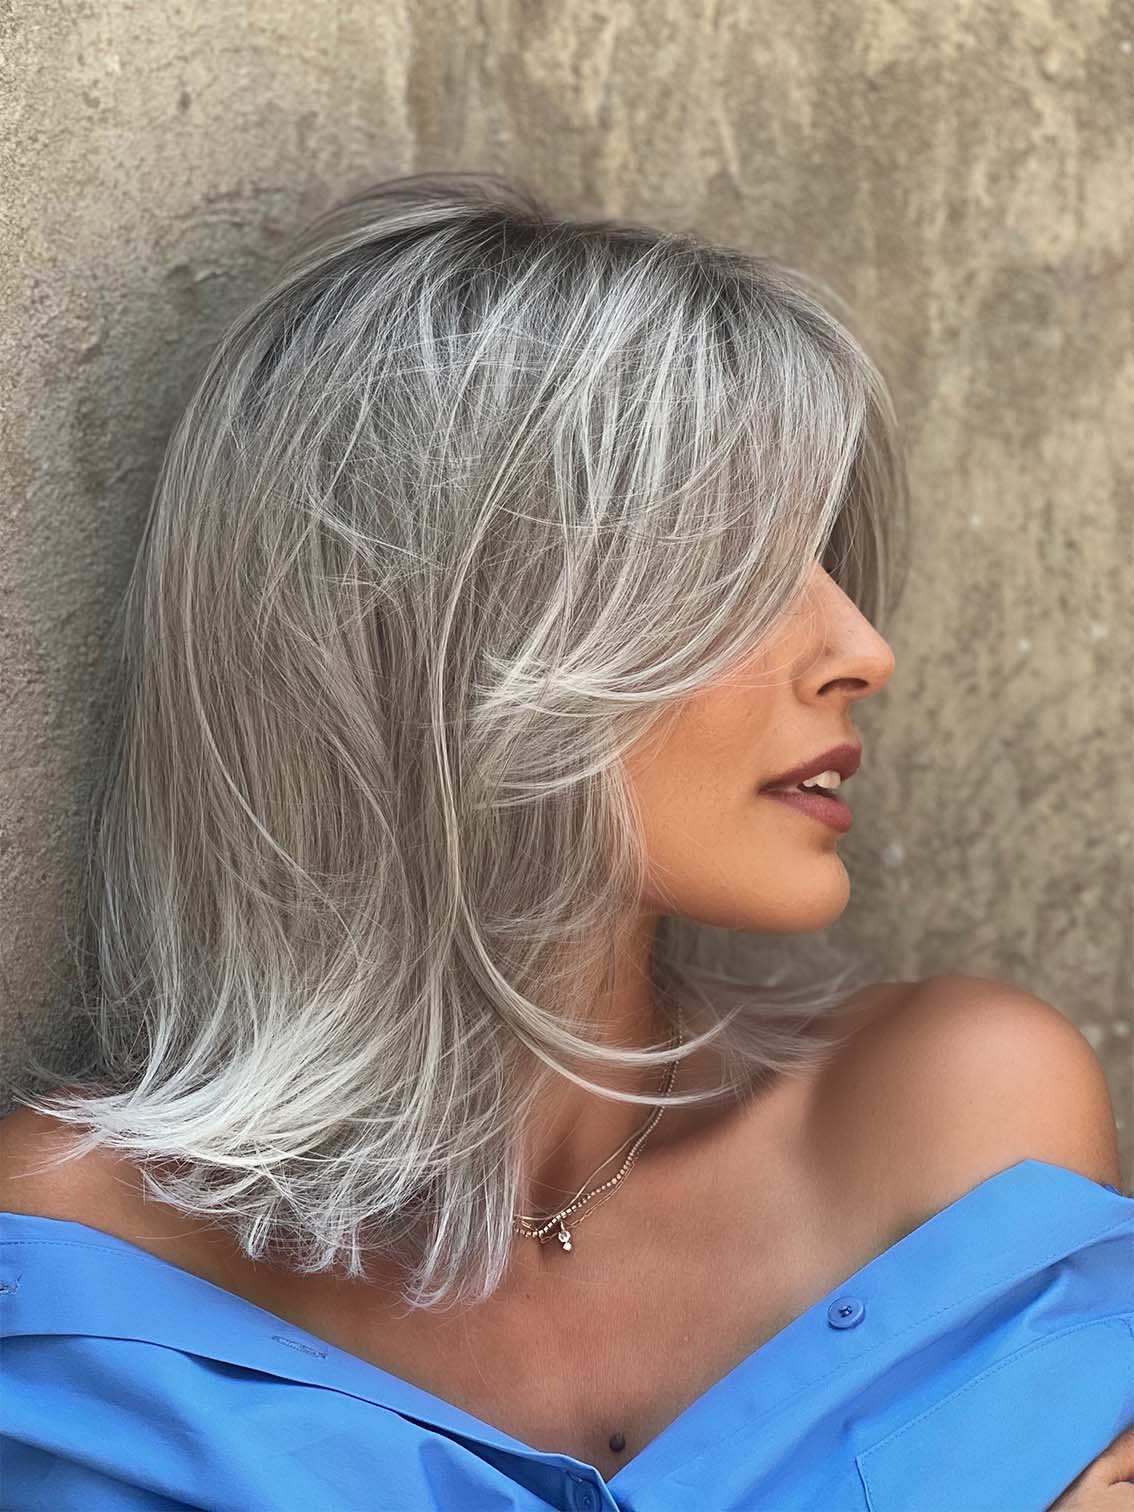 MELODY by ELLEN WILLE in STONEGREY ROOTED 58.51.56 | Grey with Black/Dark Brown and Lightest Blonde Blend with Shaded Roots